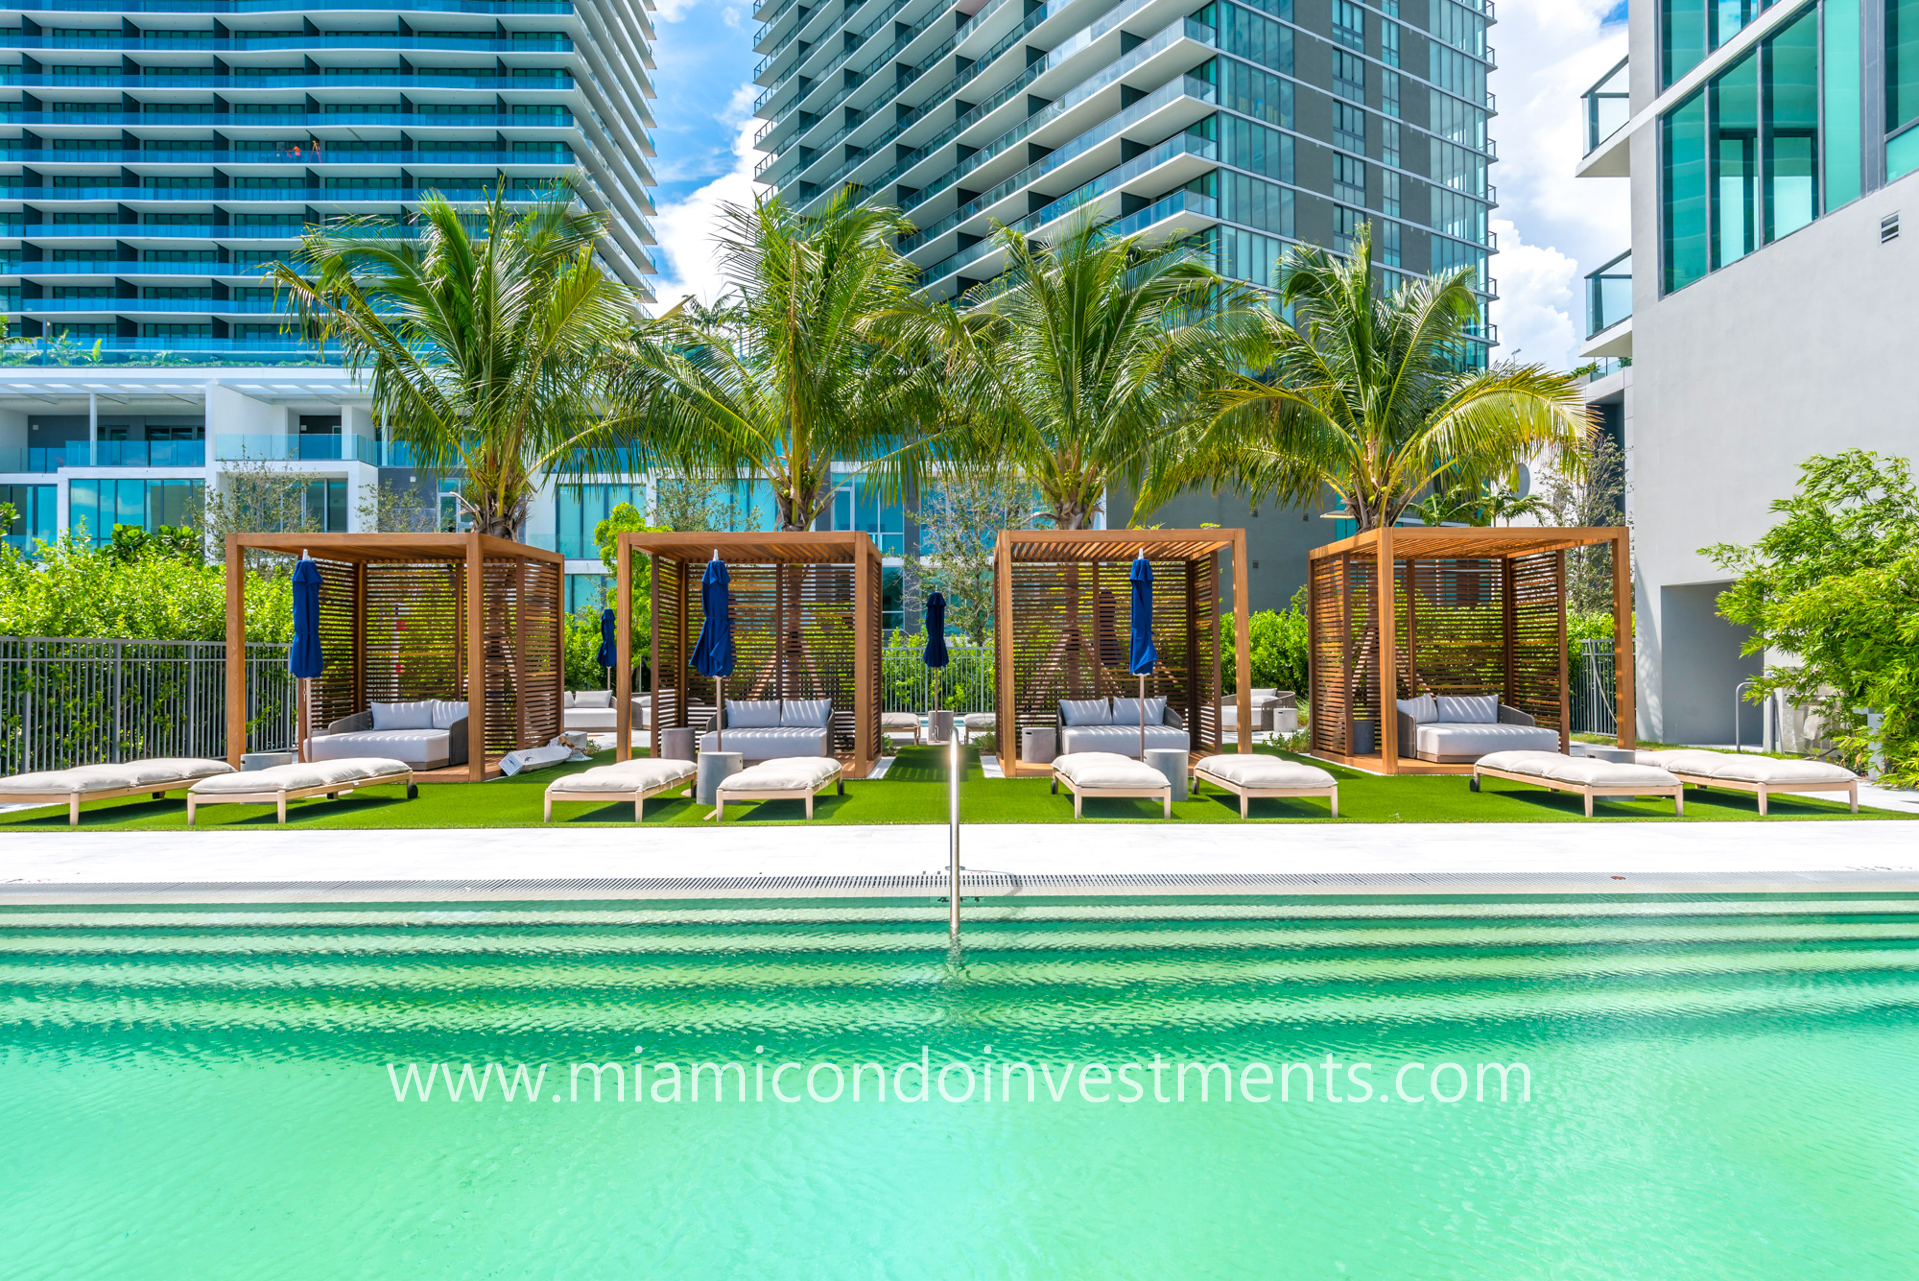 One Paraiso ground floor pool and cabanas